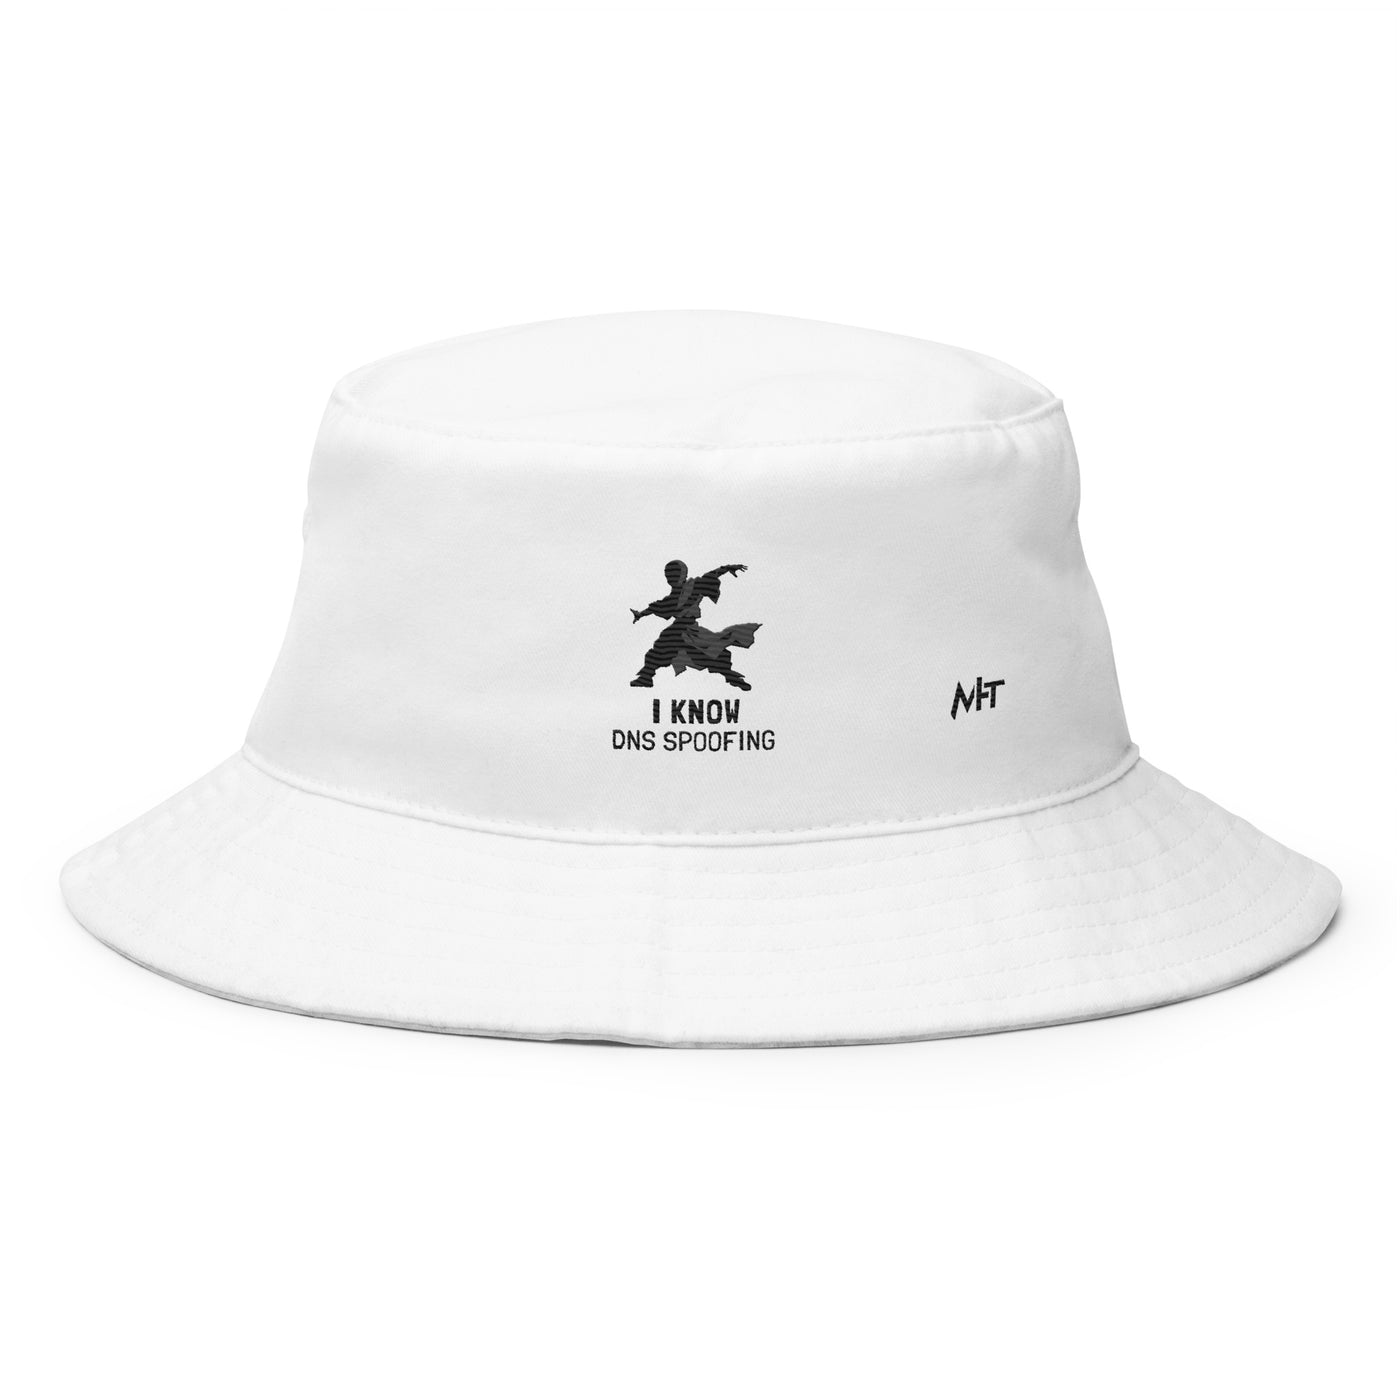 I Know DNS Spoofing - Bucket Hat